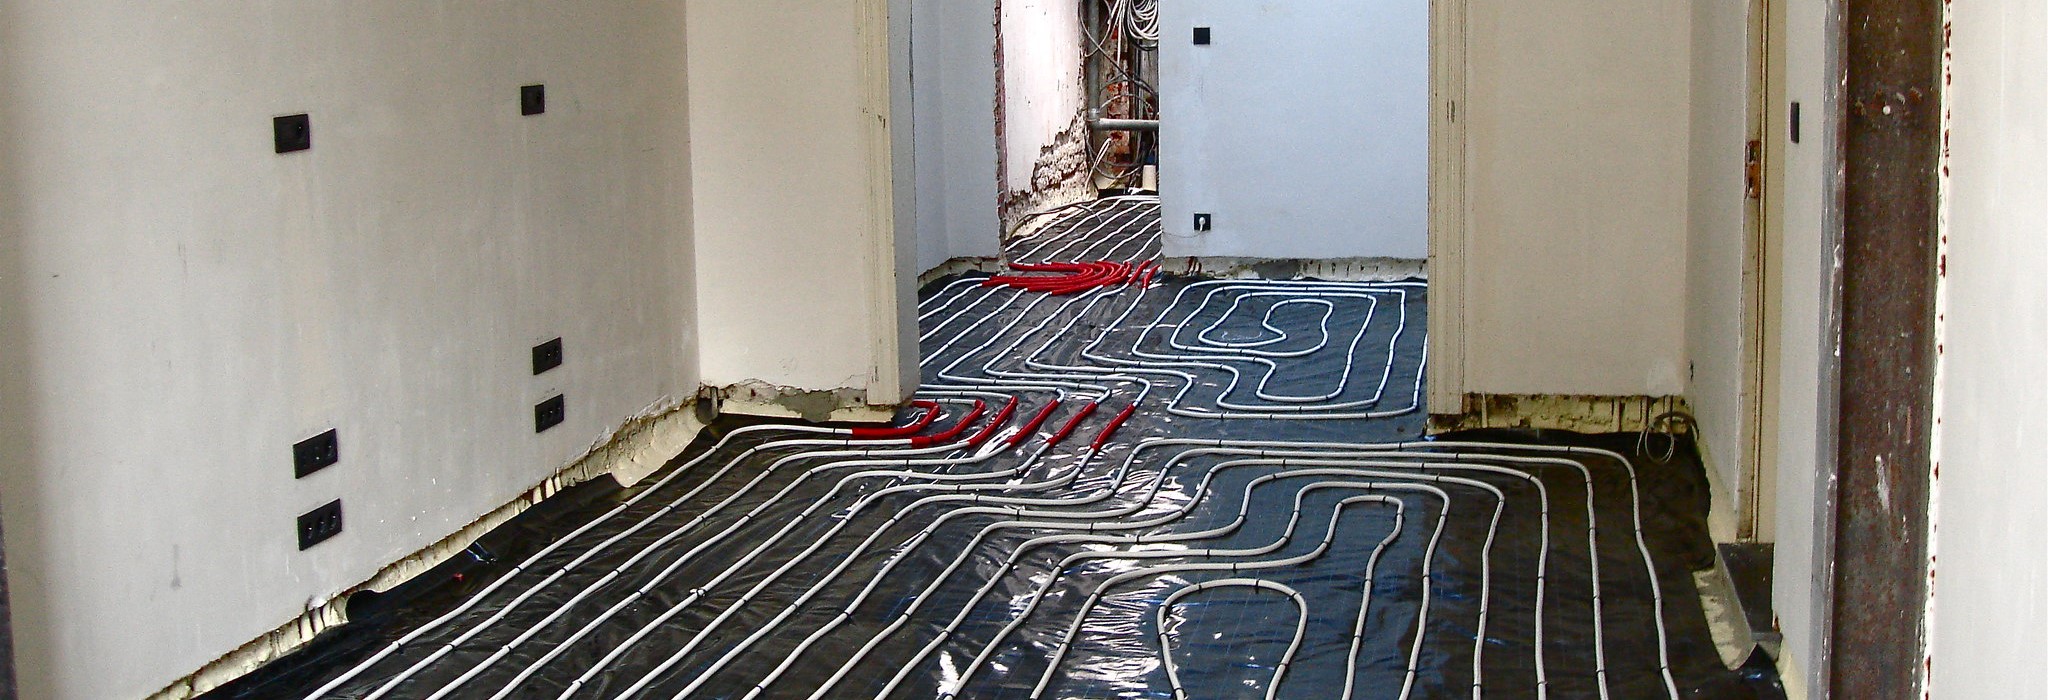 Underfloor heating vs Radiators - what are the differences?